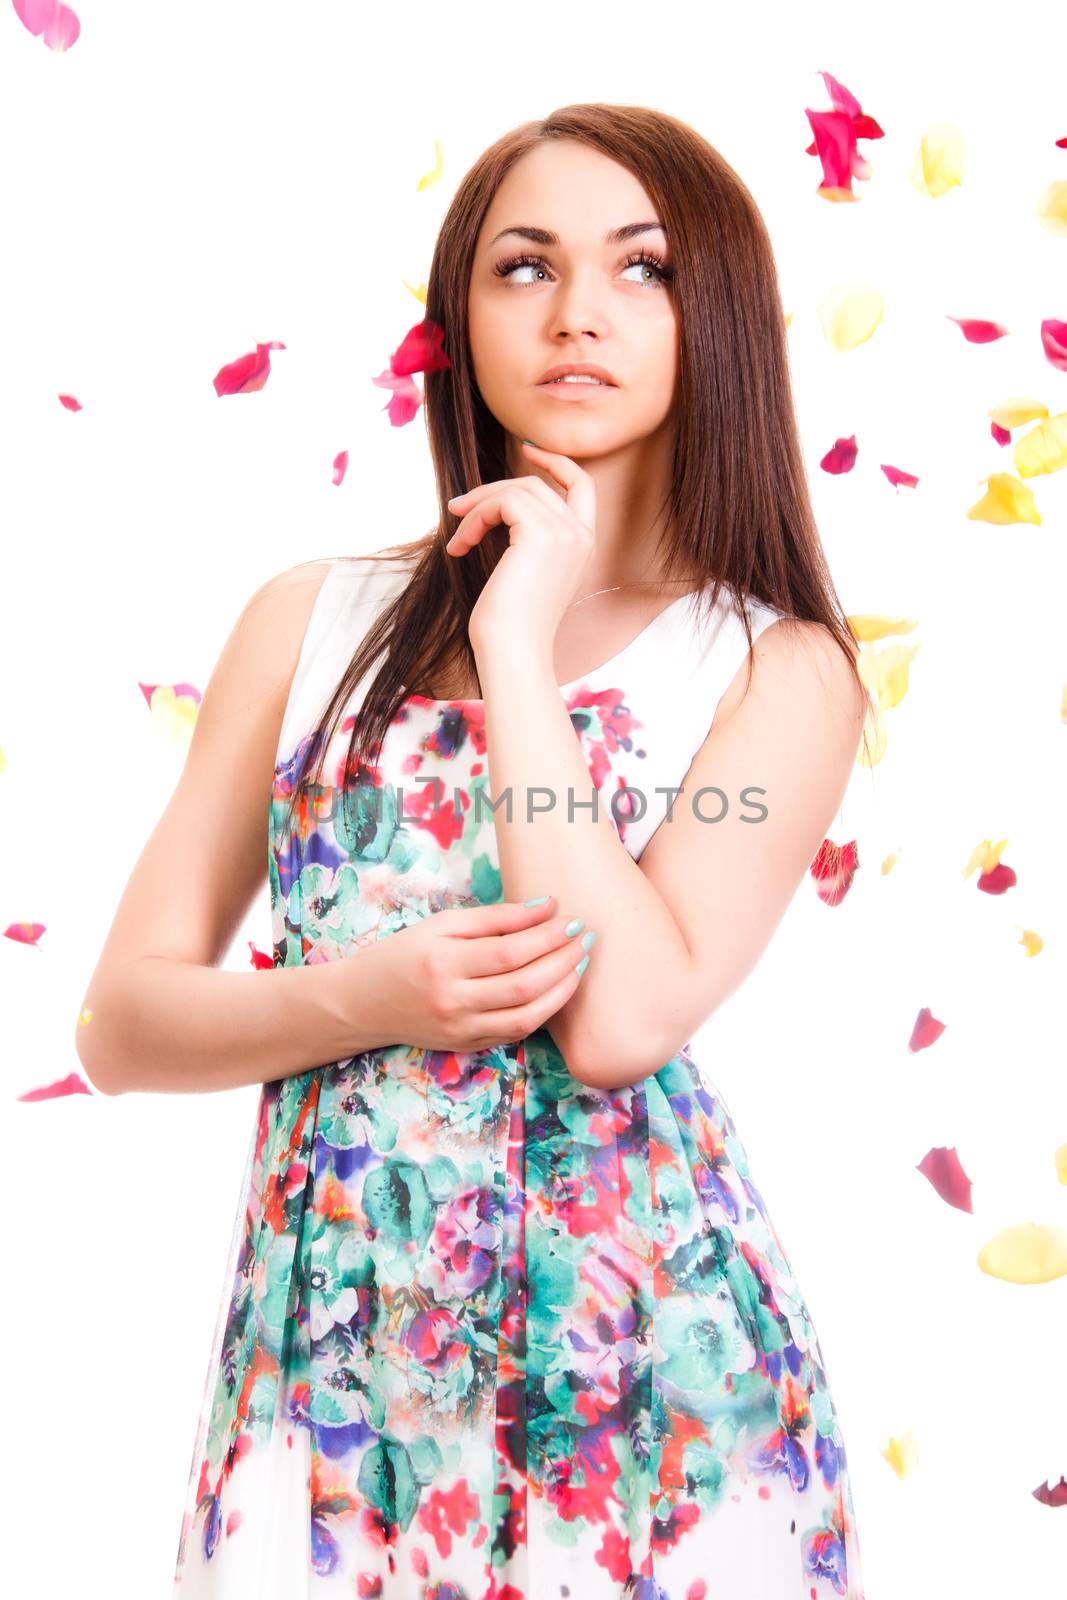 Portrait of a pretty young woman in a bright dress isolated over white background with pink and yellow falling petals